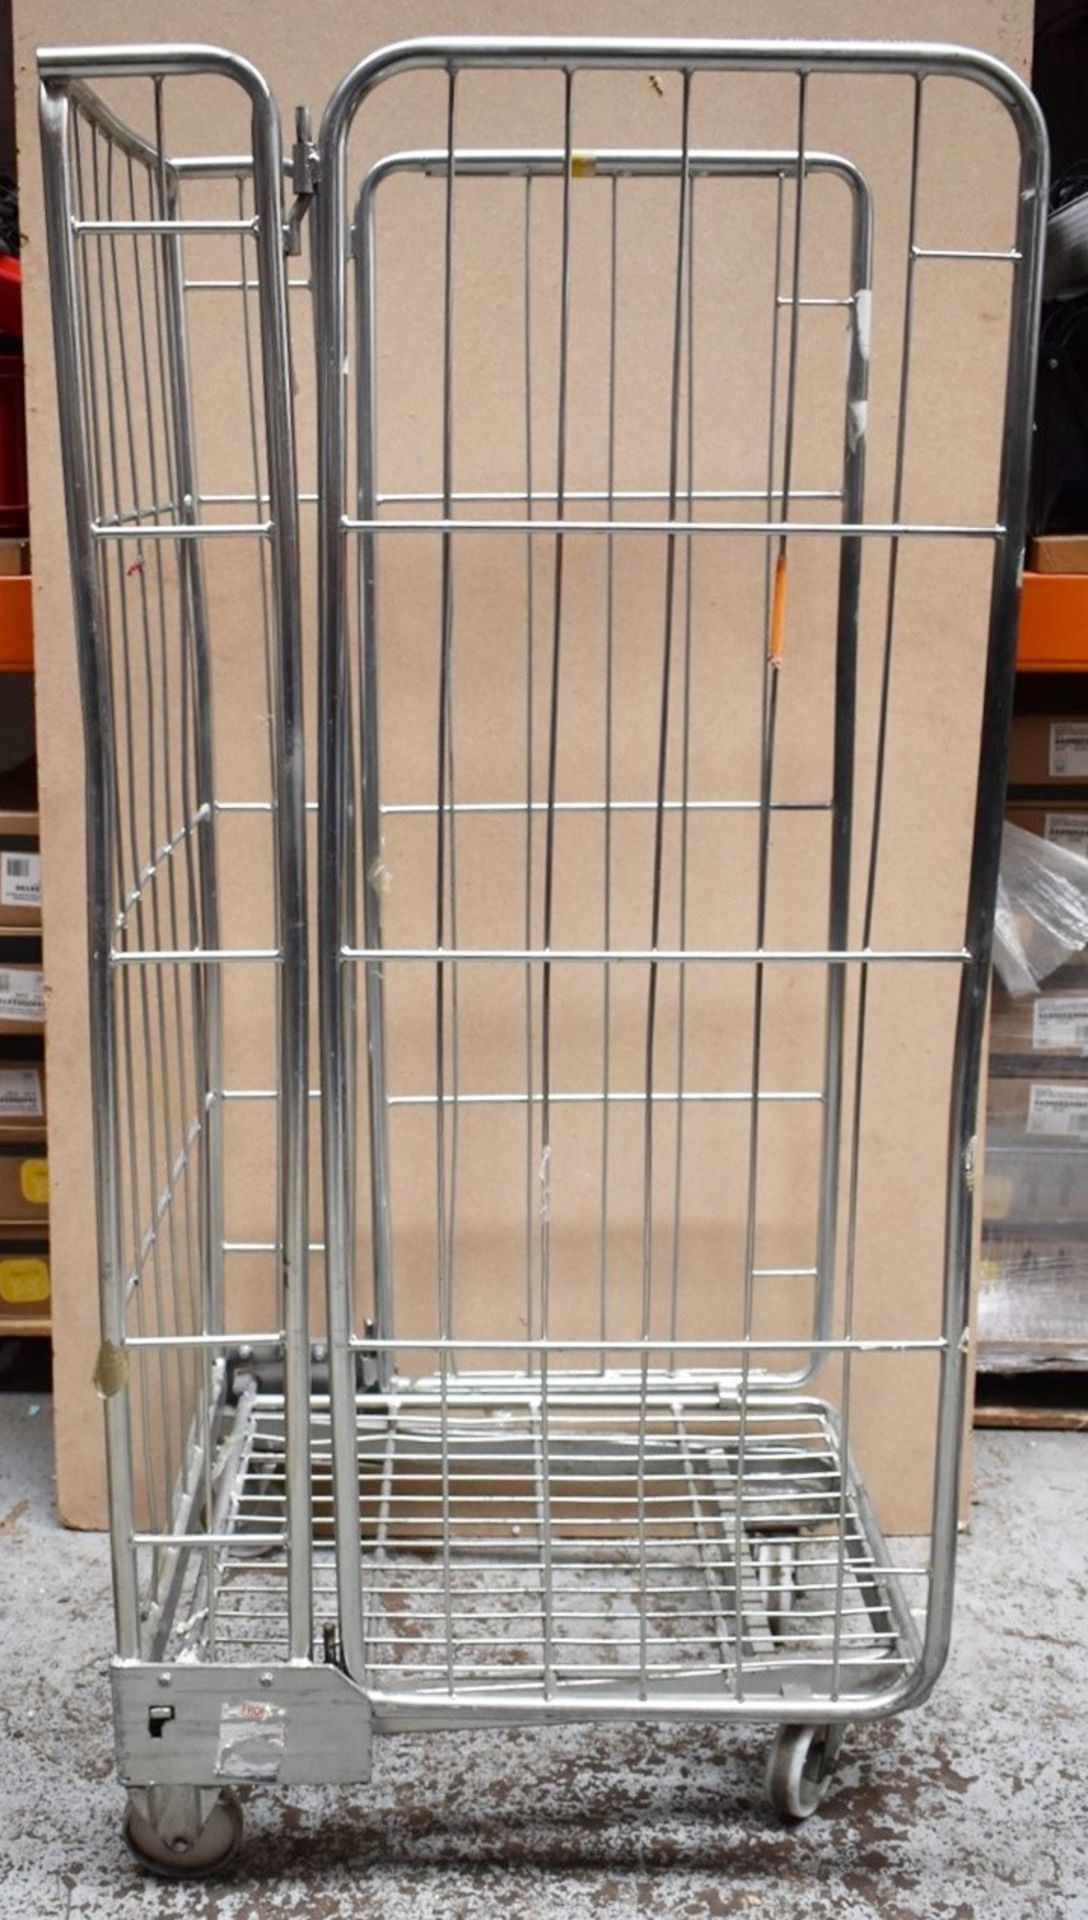 4 x Roller Cages With Heavy Duty Castors - Demountable With Three Sides - Ideal For Storing and - Image 10 of 11